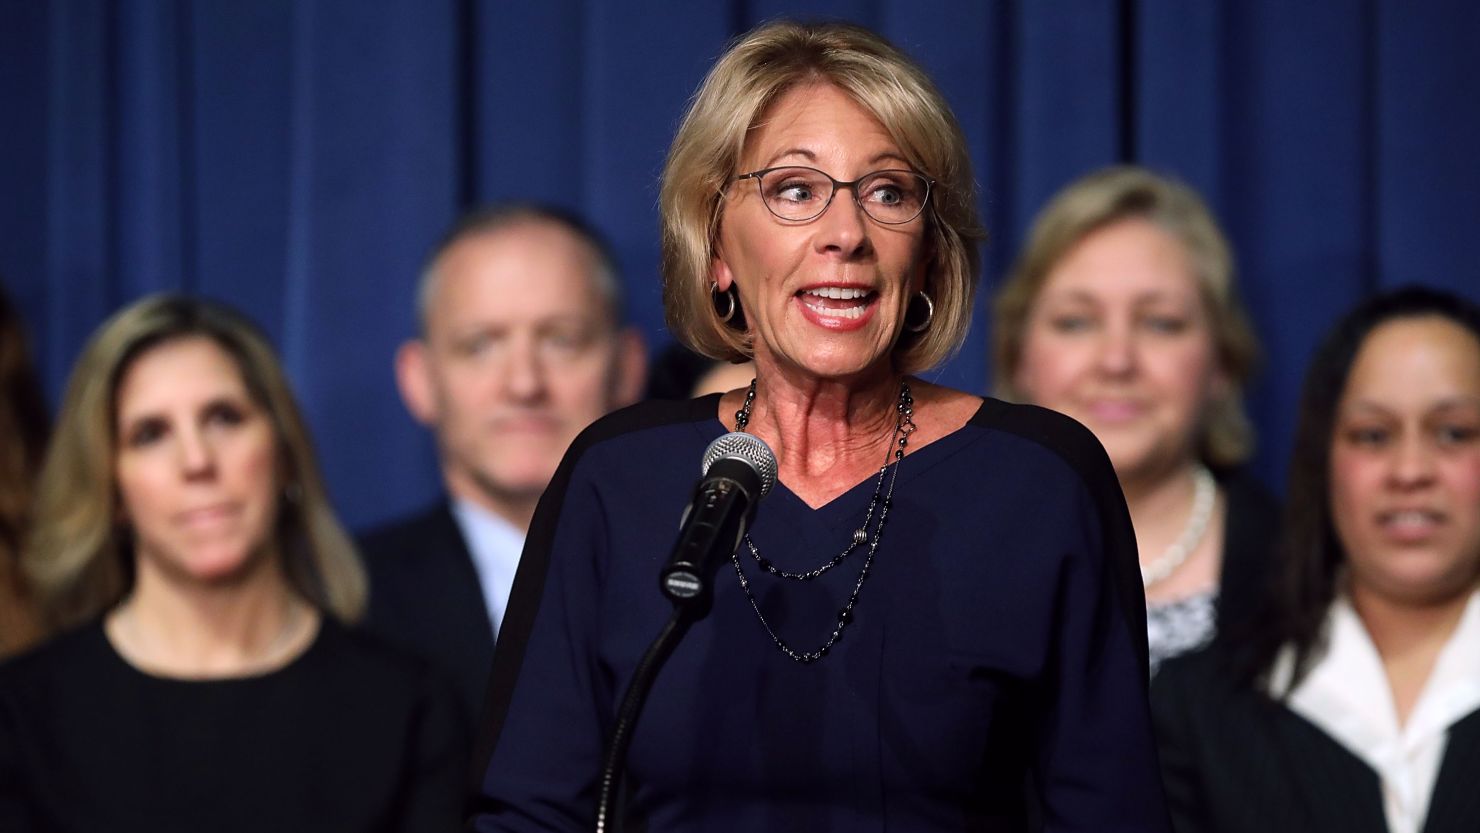 Education Secretary Betsy DeVos says states that resist school choice innovations would be making a "terrible mistake."